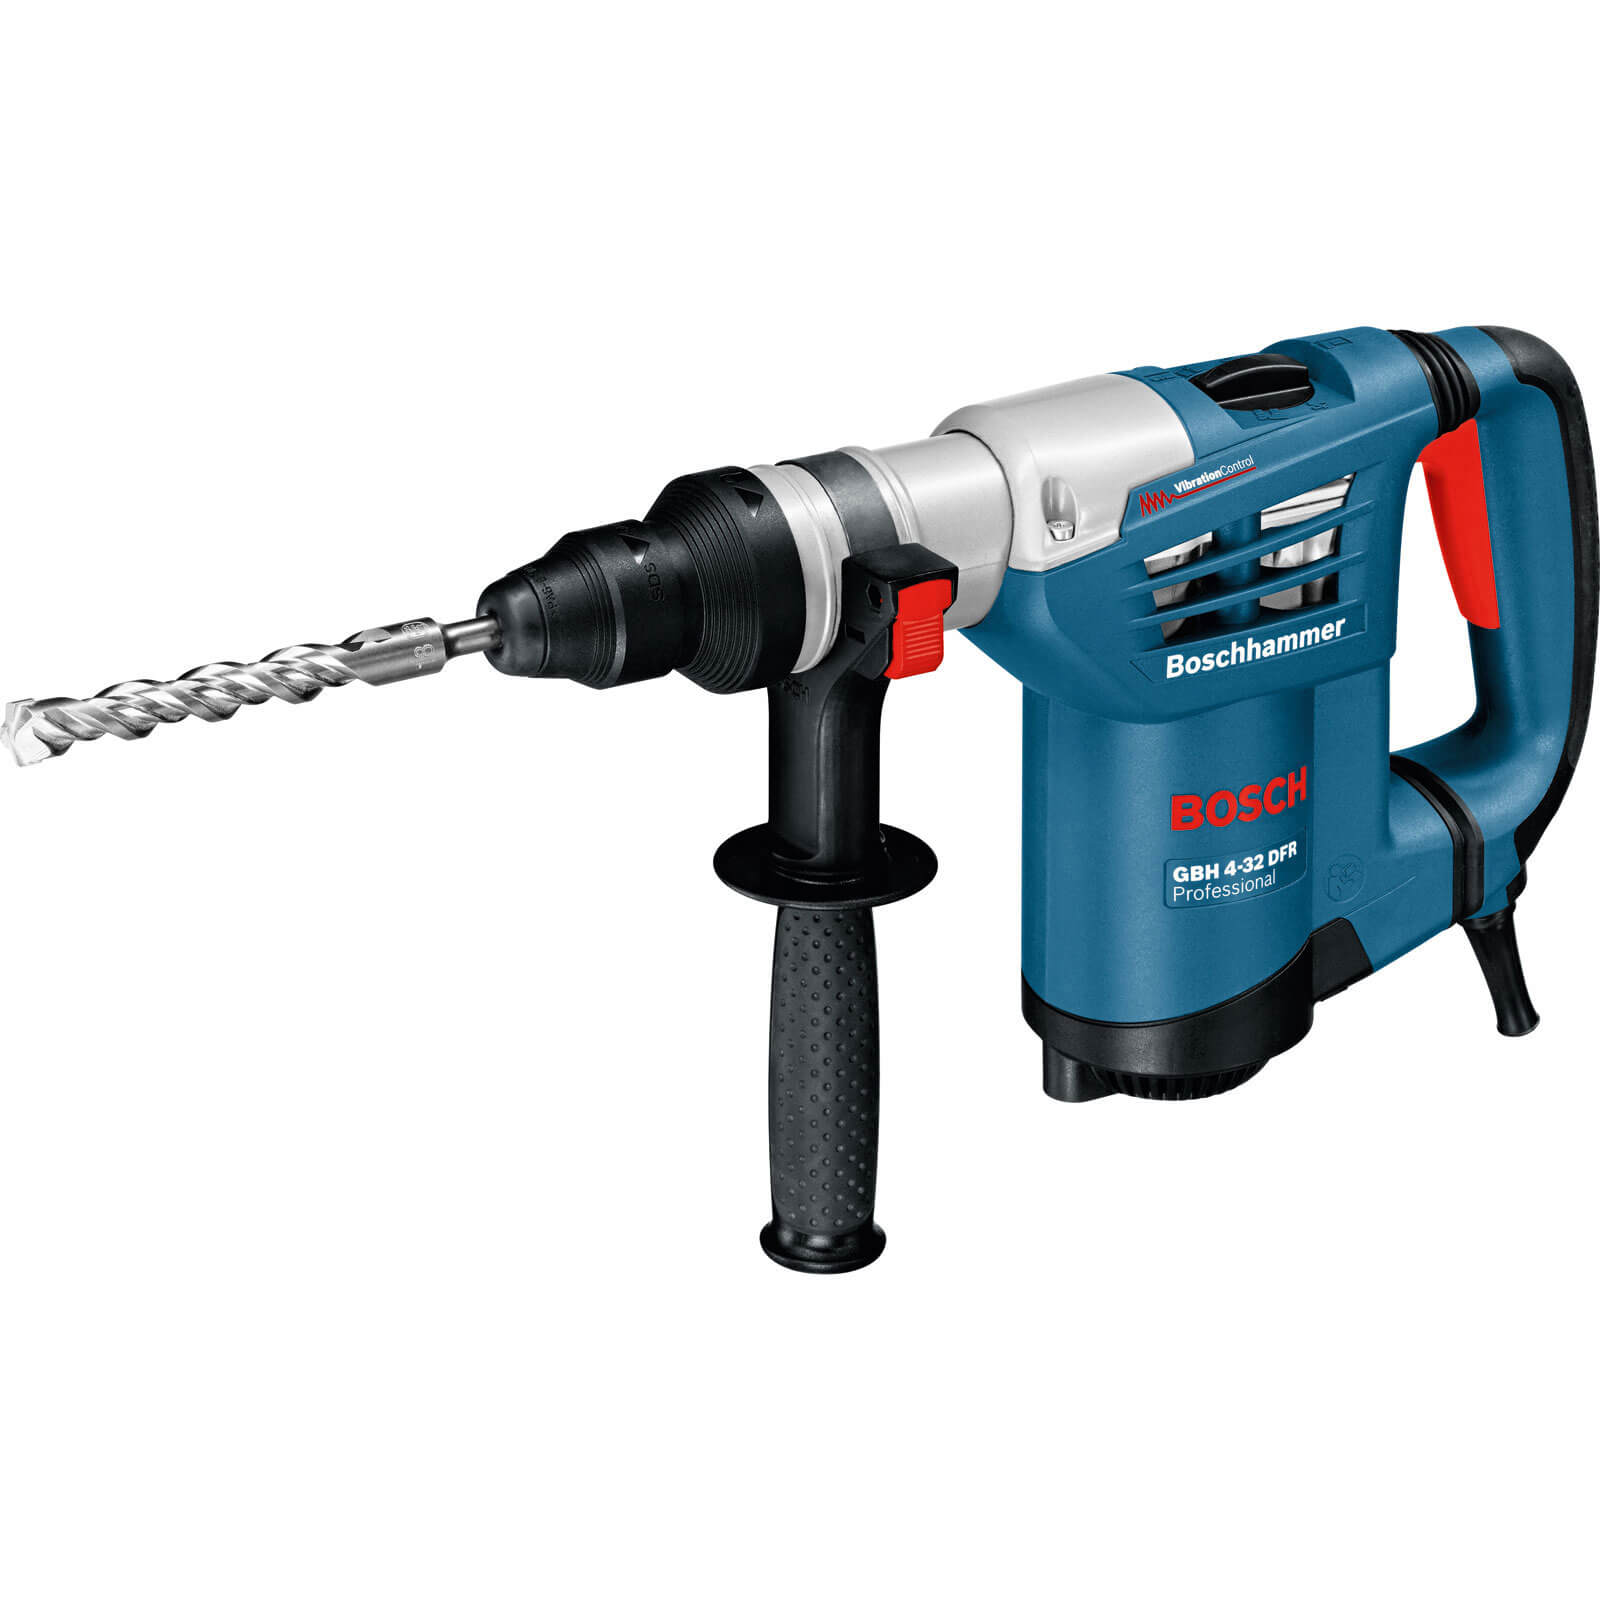 Photo of Bosch Gbh 4 32 Dfr Sds Plus Rotary Hammer Drill 240v